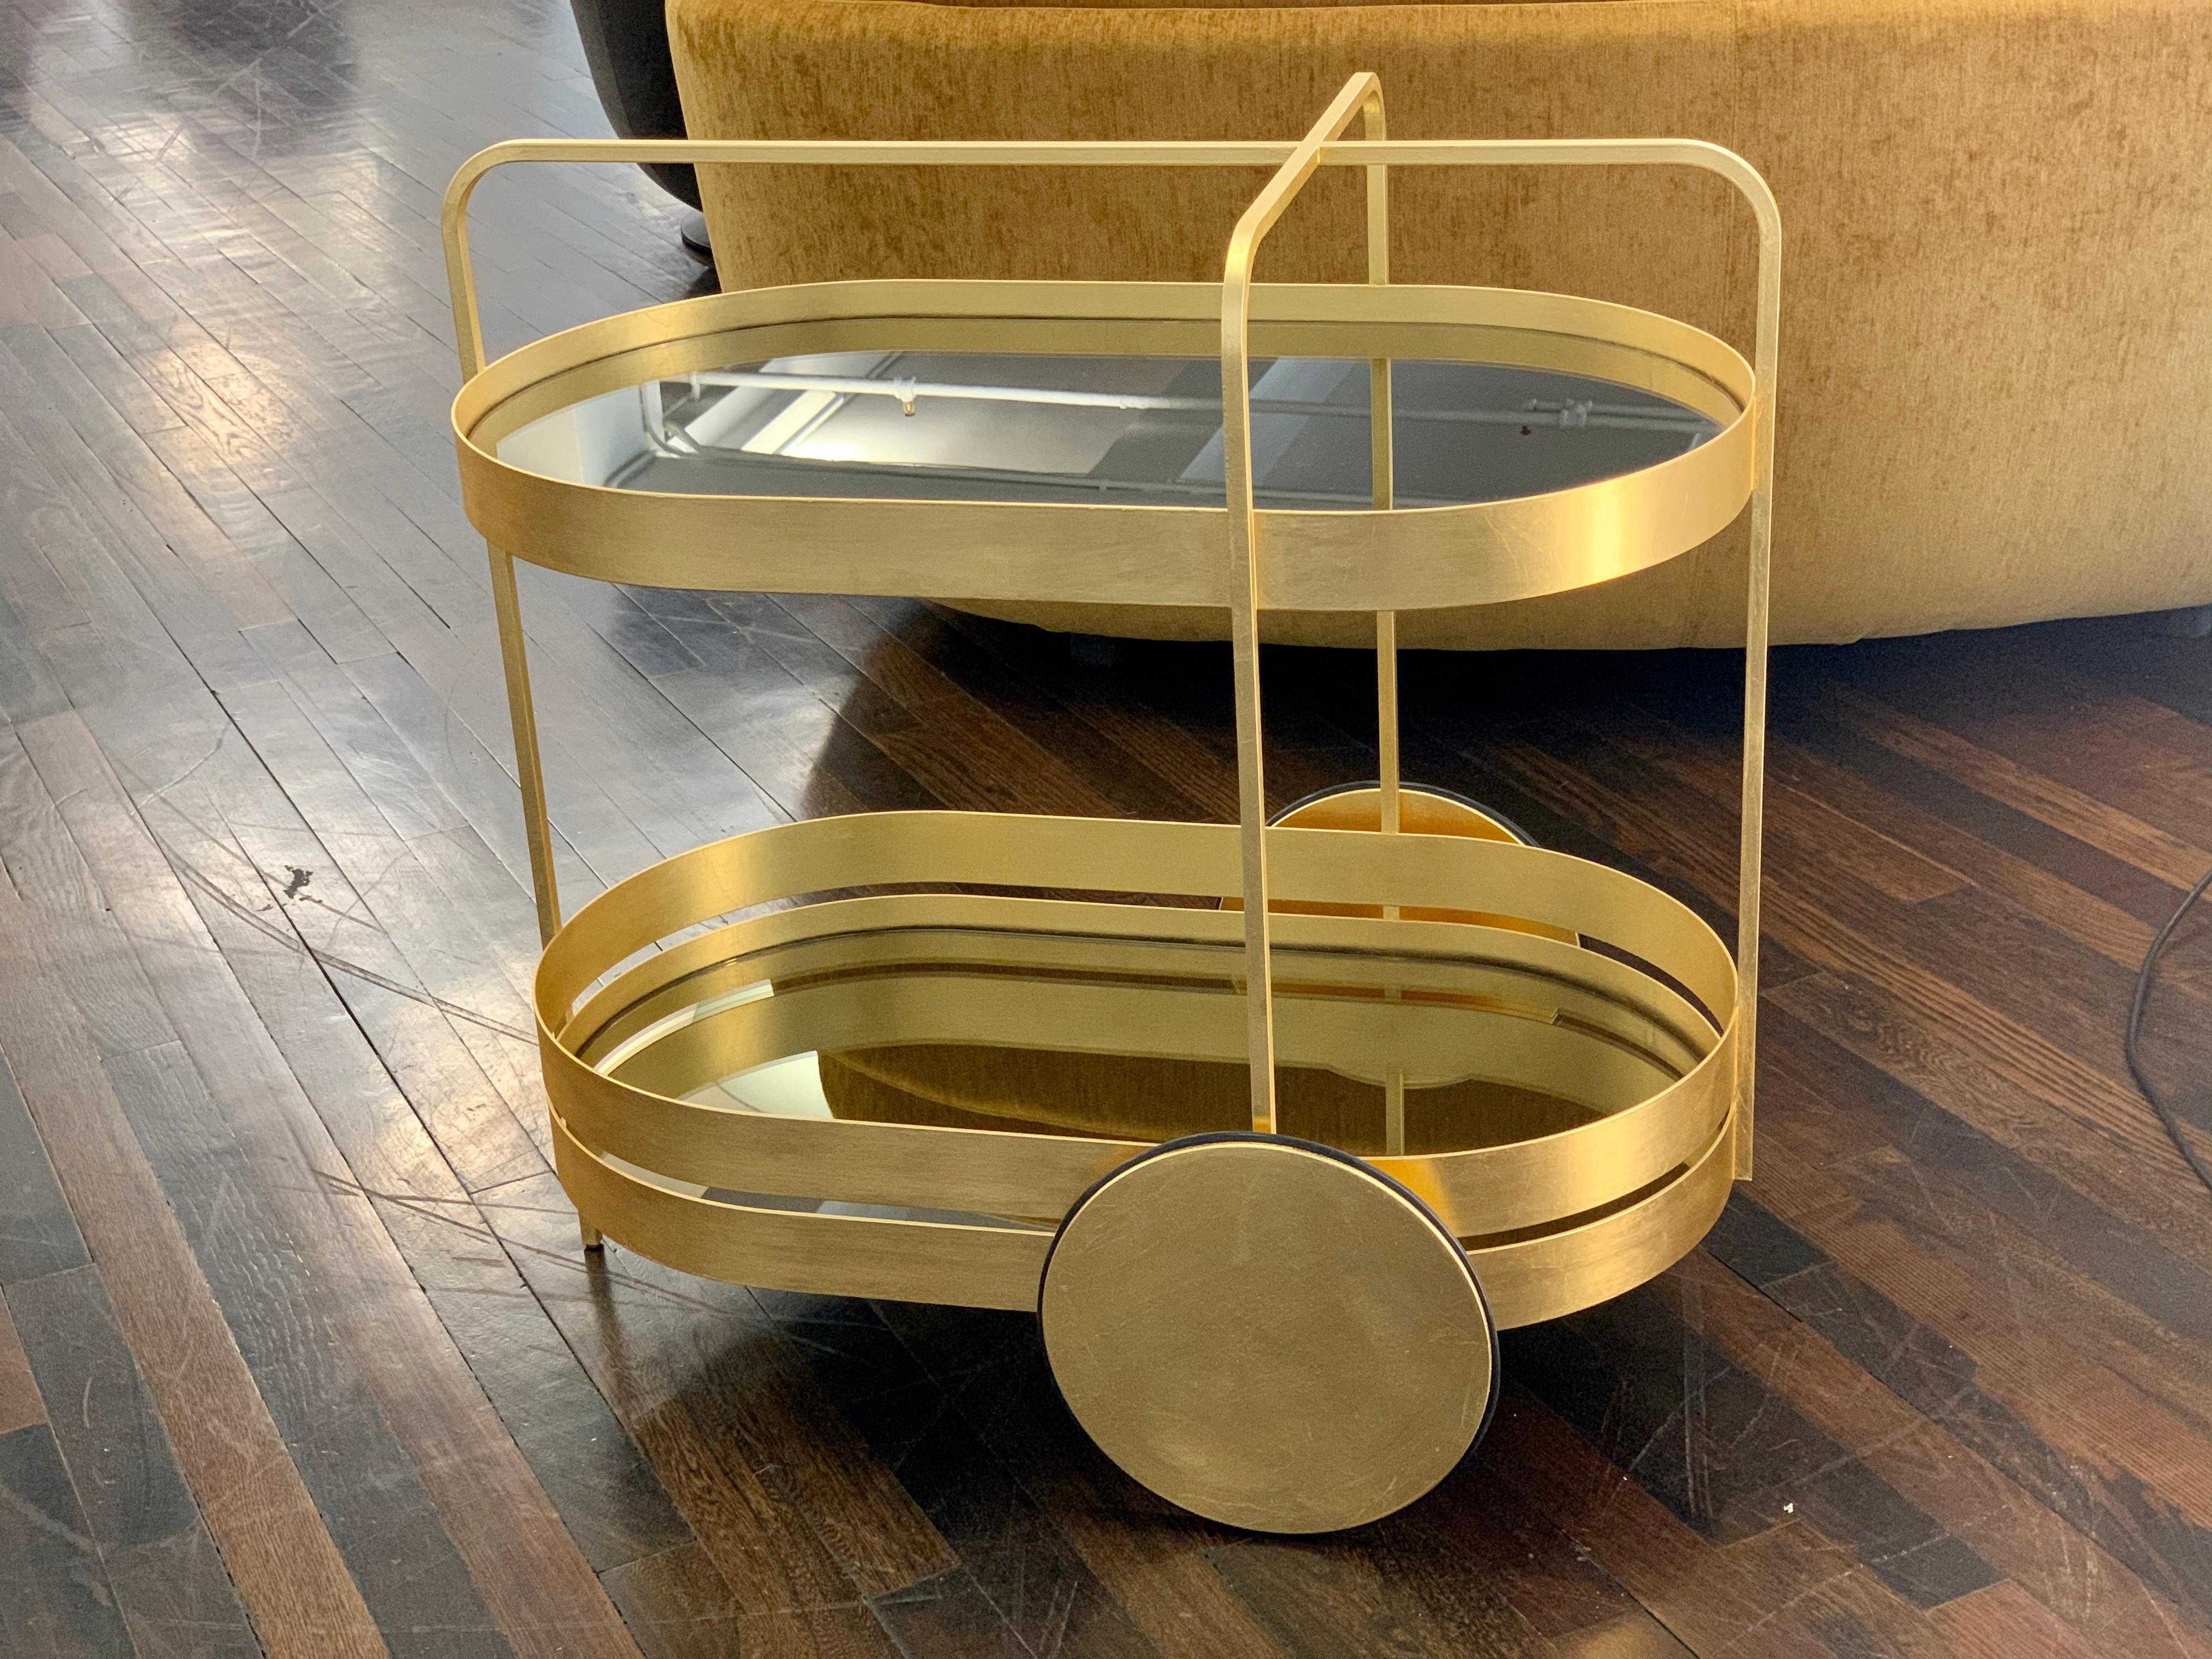 Glamour and grace. The Grace gold edition serving trolley is an absolute interior highlight, available in a limited edition of just 50 units. Its Minimalist forms are the perfect example of a modern take on the Classic serving trolley. Clean lines